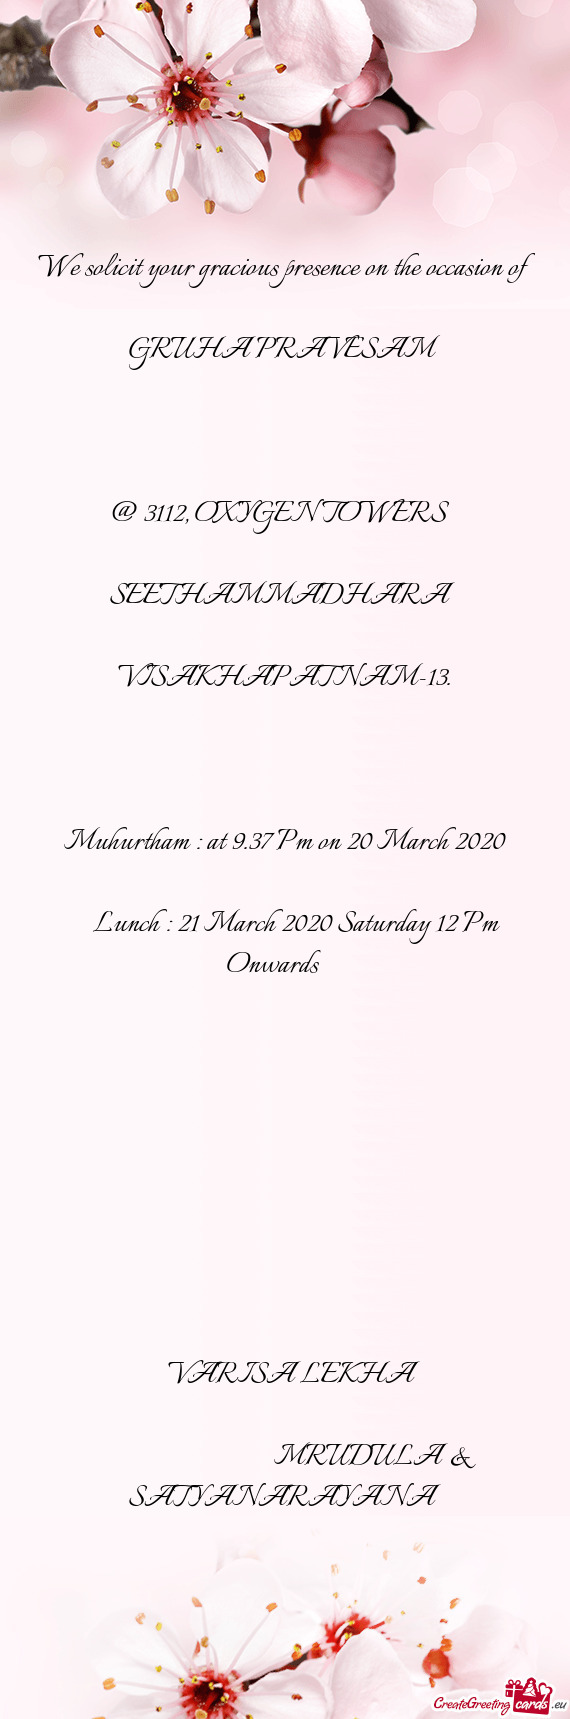 Lunch : 21 March 2020 Saturday 12 Pm Onwards